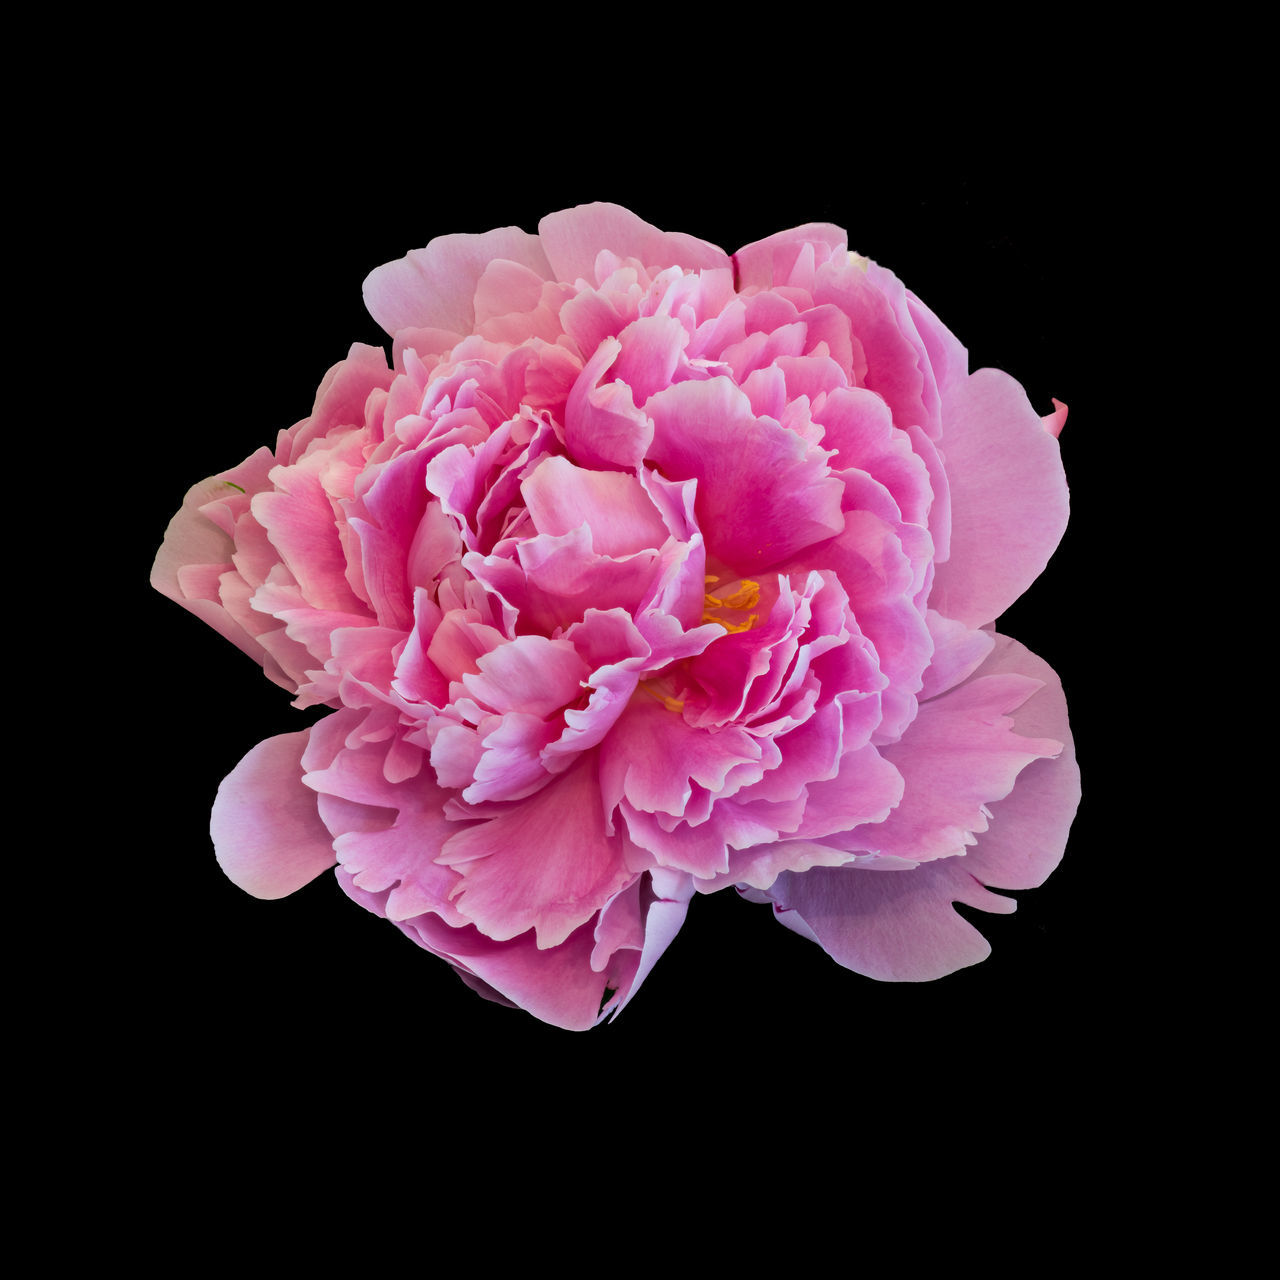 CLOSE-UP OF PINK PEONY FLOWER AGAINST BLACK BACKGROUND